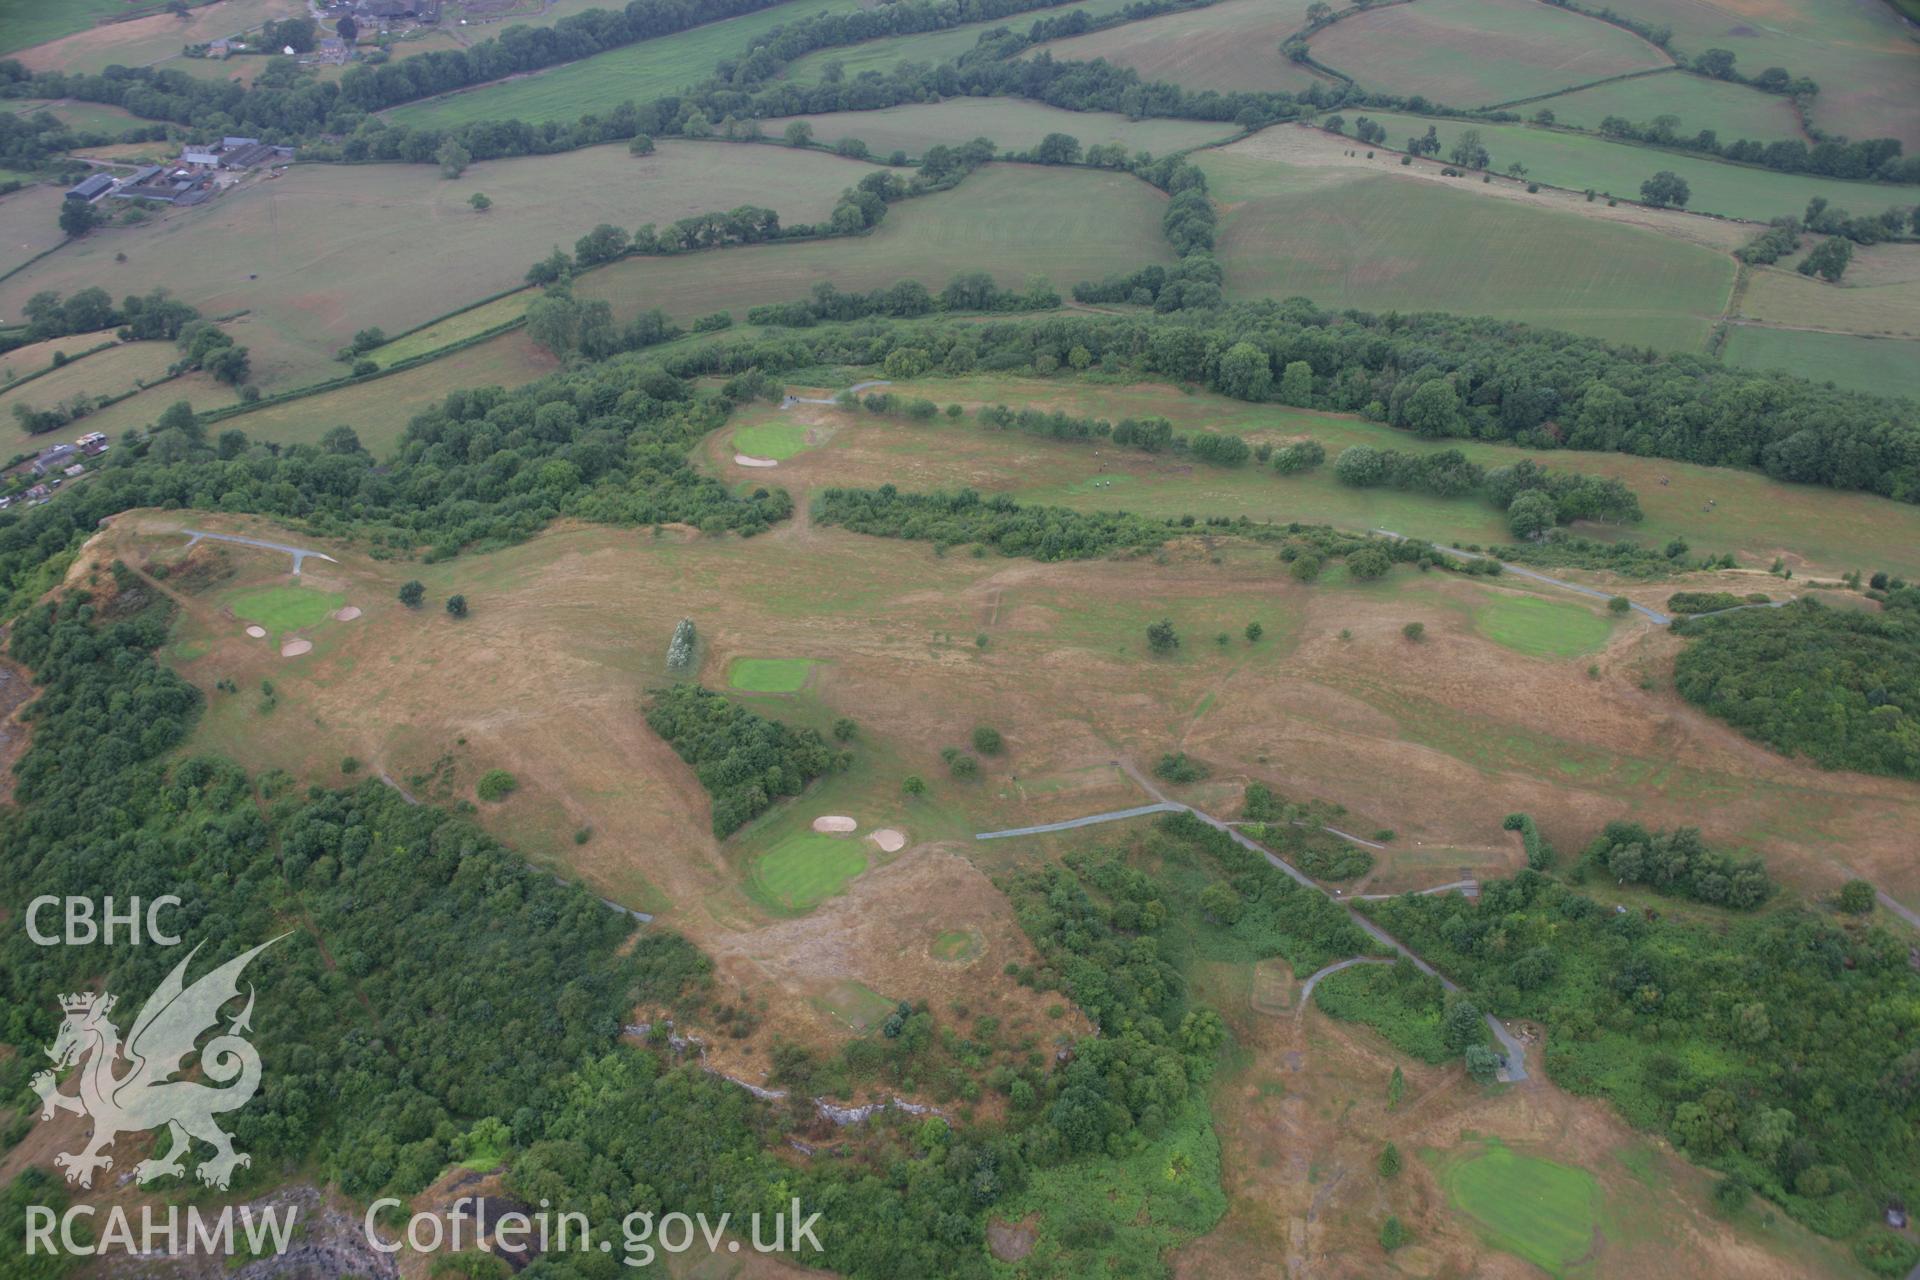 RCAHMW colour oblique aerial photograph of Llanymynech Hillfort. Taken on 31 July 2006 by Toby Driver.